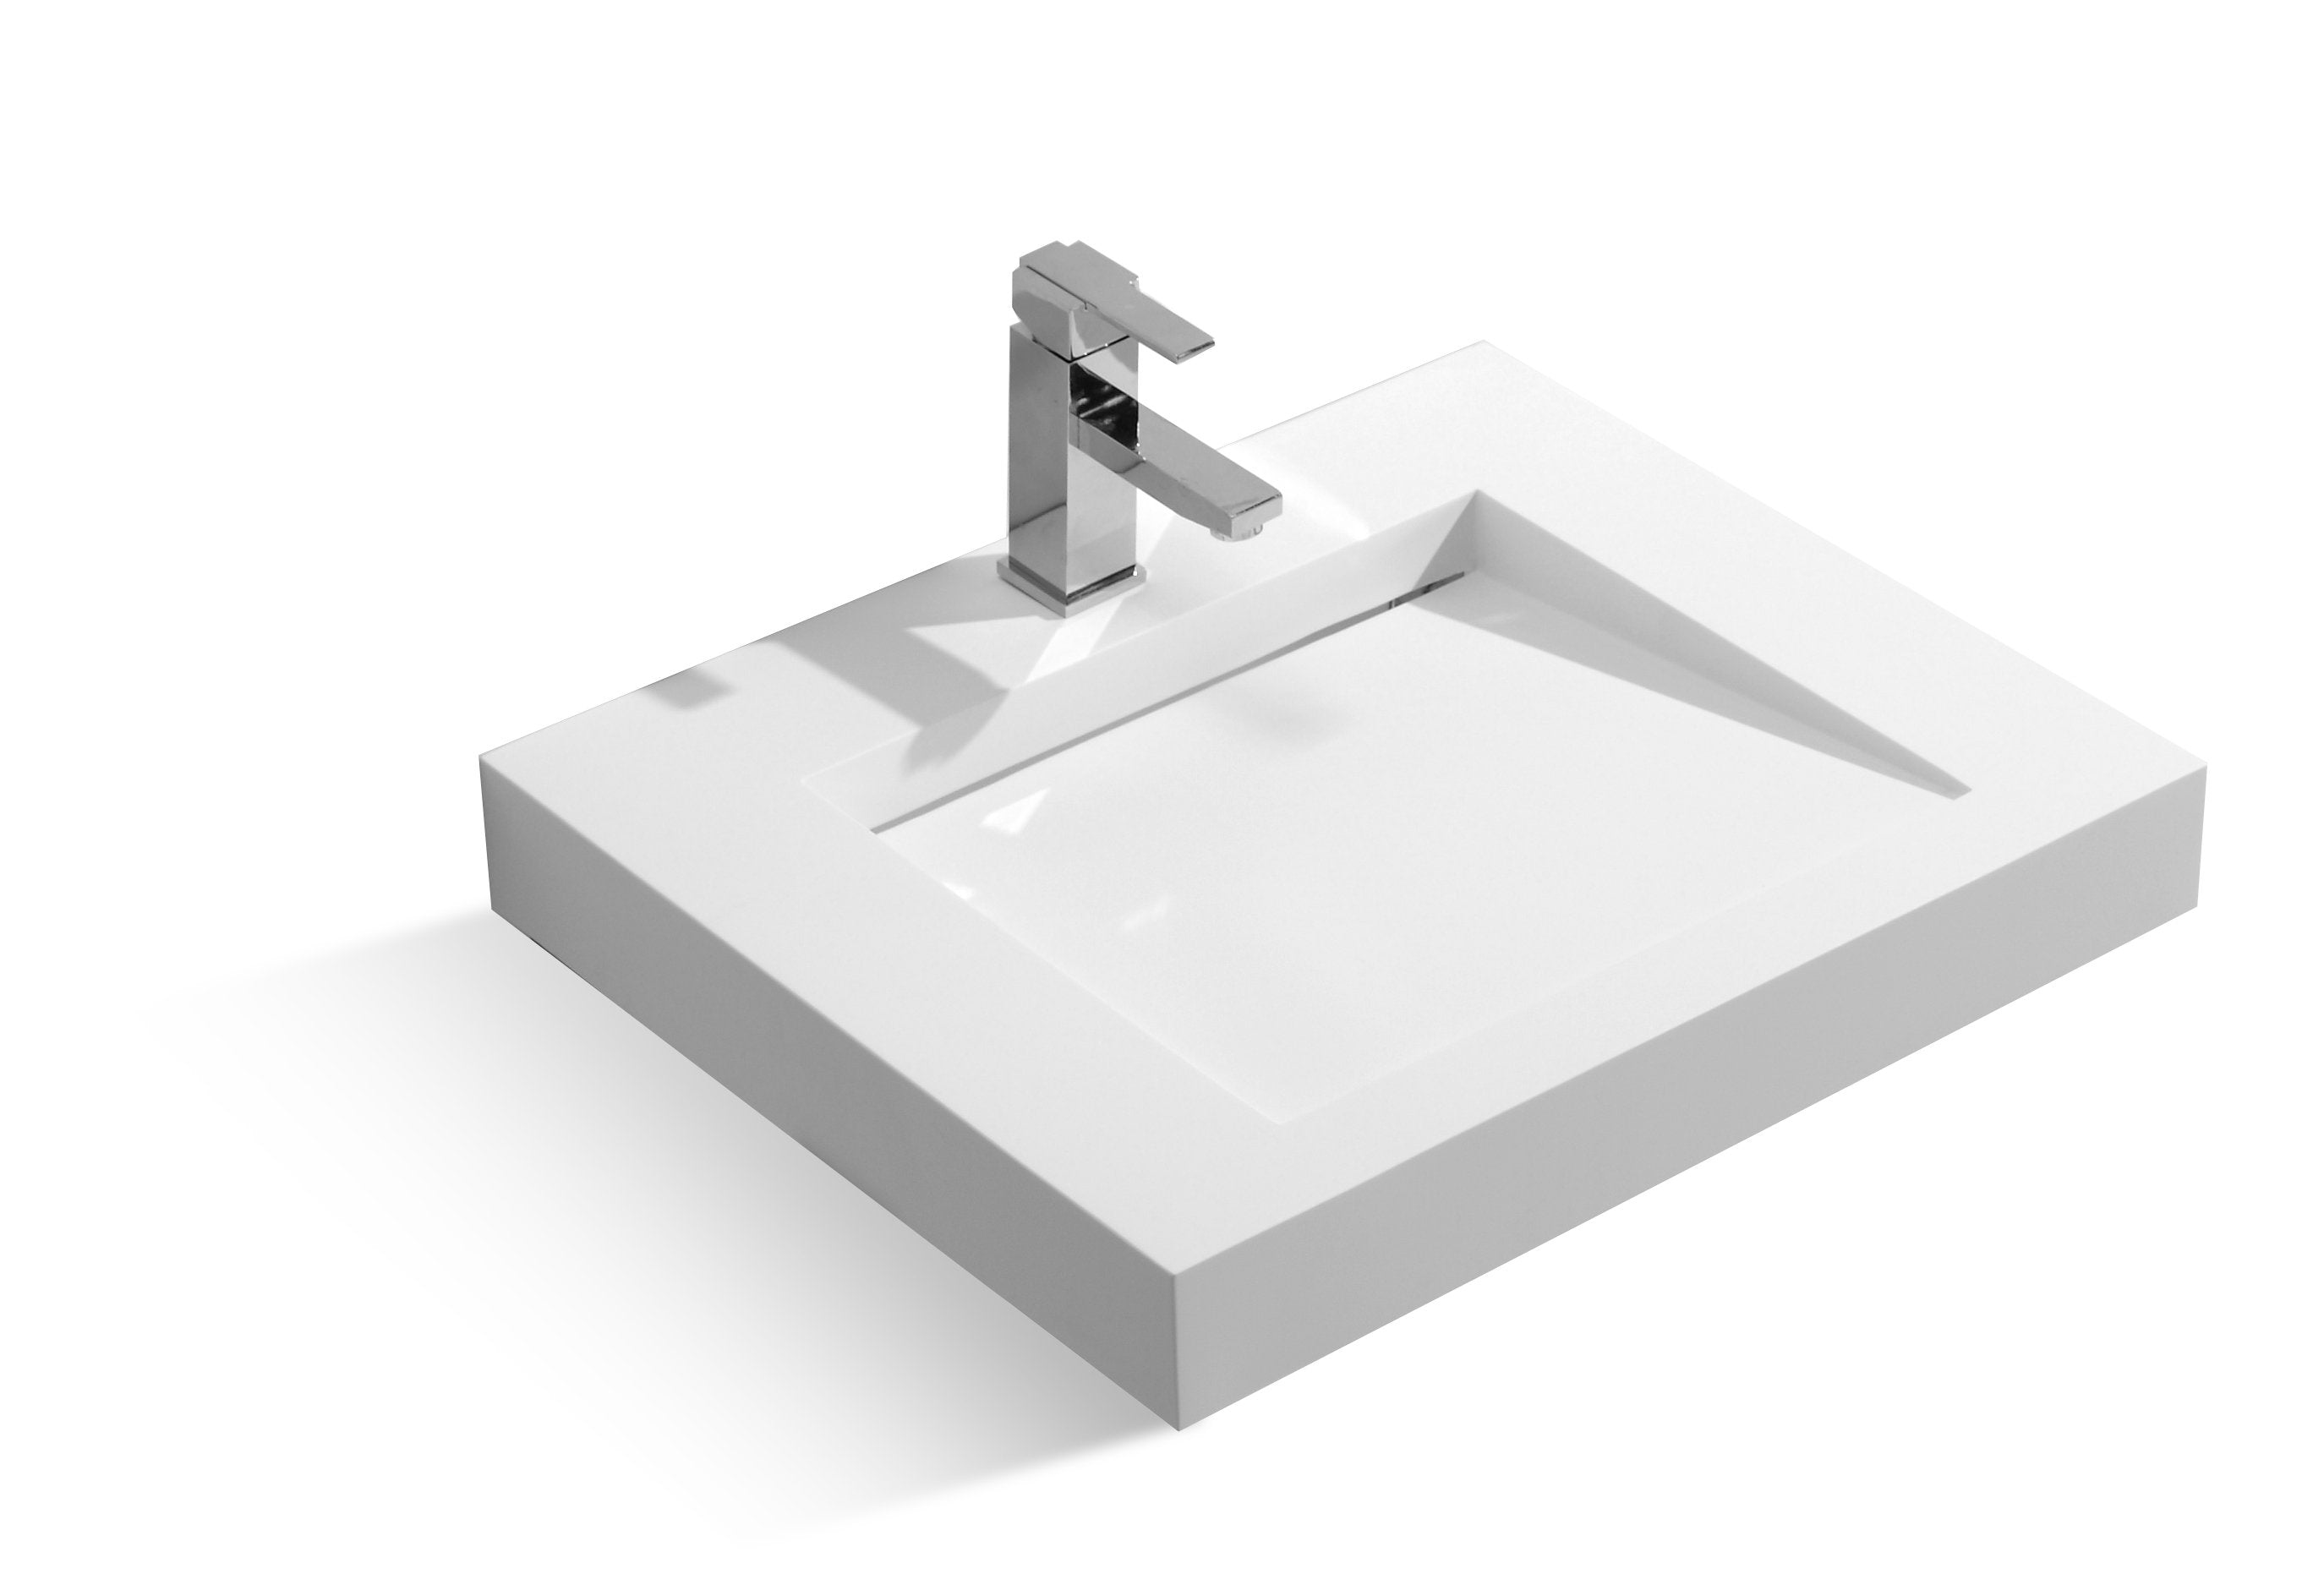 DAX Solid Surface Rectangle Single Bowl Top Mount Bathroom Sink, White Matte Finish, 23-1/4 x 19-5/16 x 3-1/8 Inches (DAX-AB-1330)